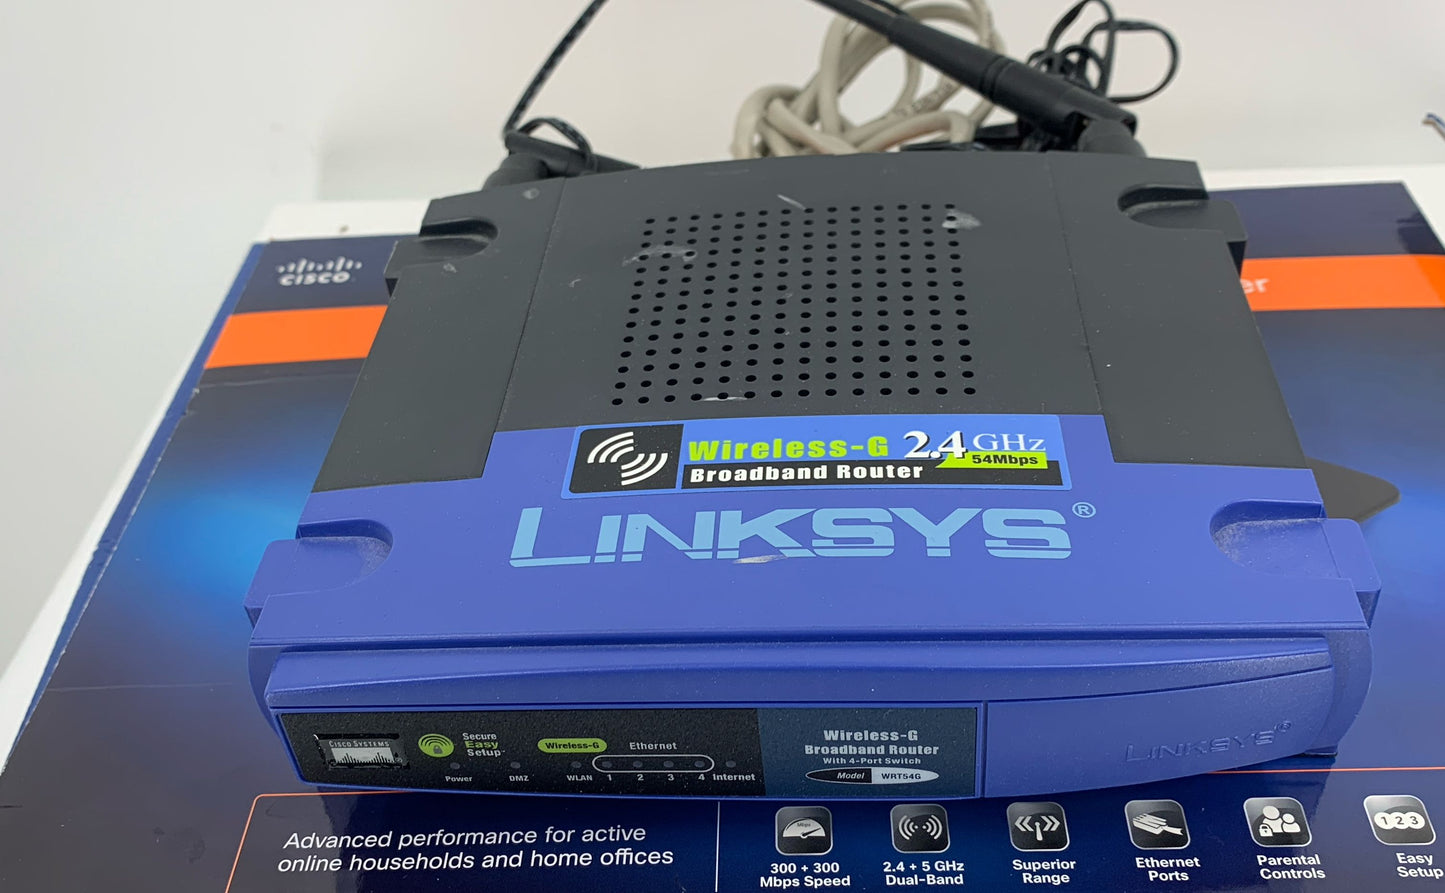 Cisco Linksys E2500 Advanced Dual-Band N Router 300+ Mbps Speed